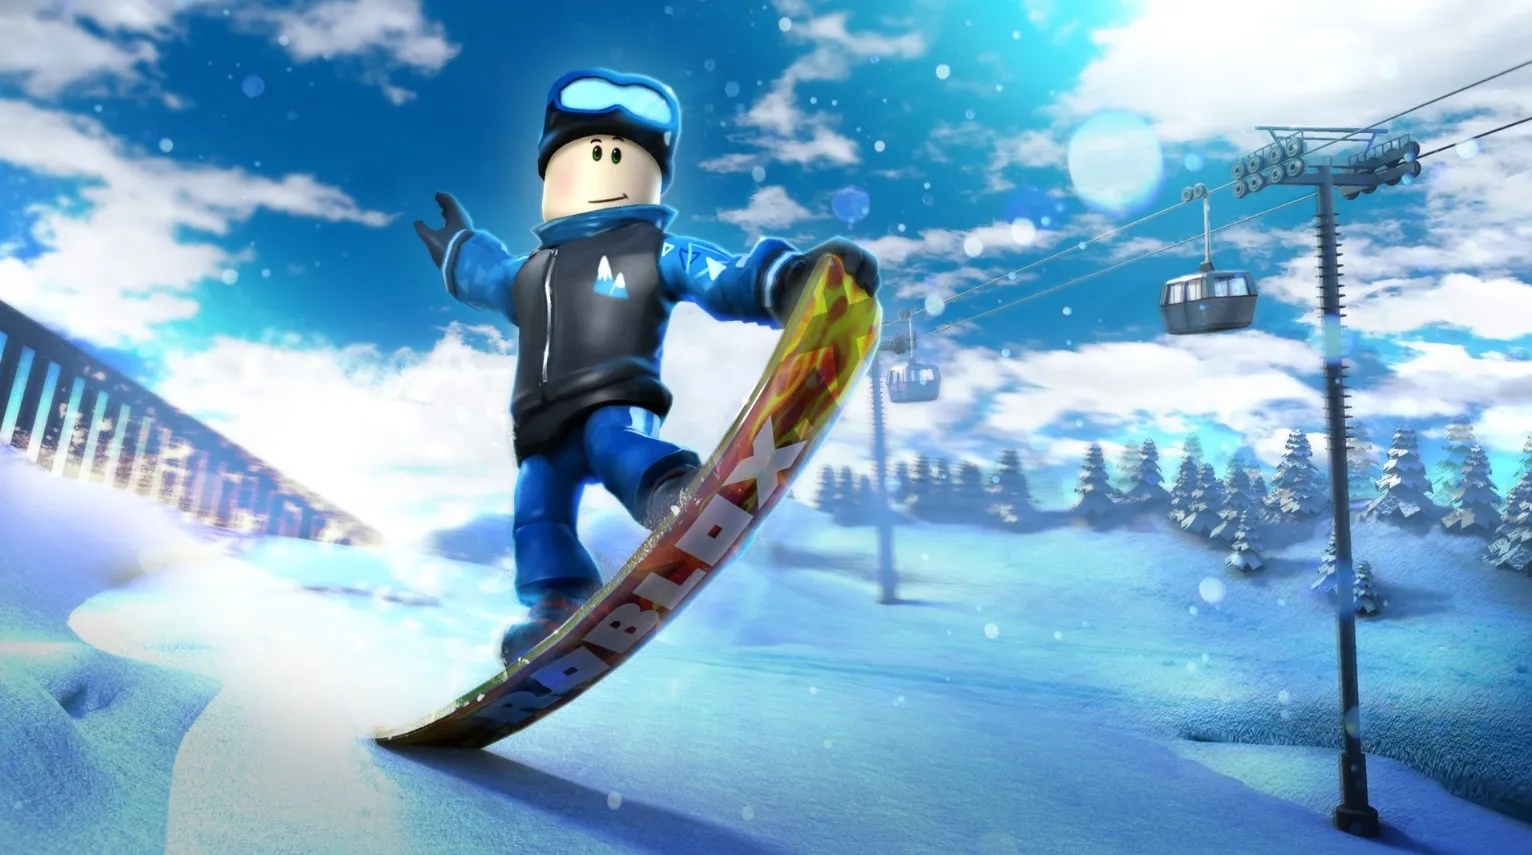 Can You Play Roblox on PS5 & PS4? Release Date Rumors